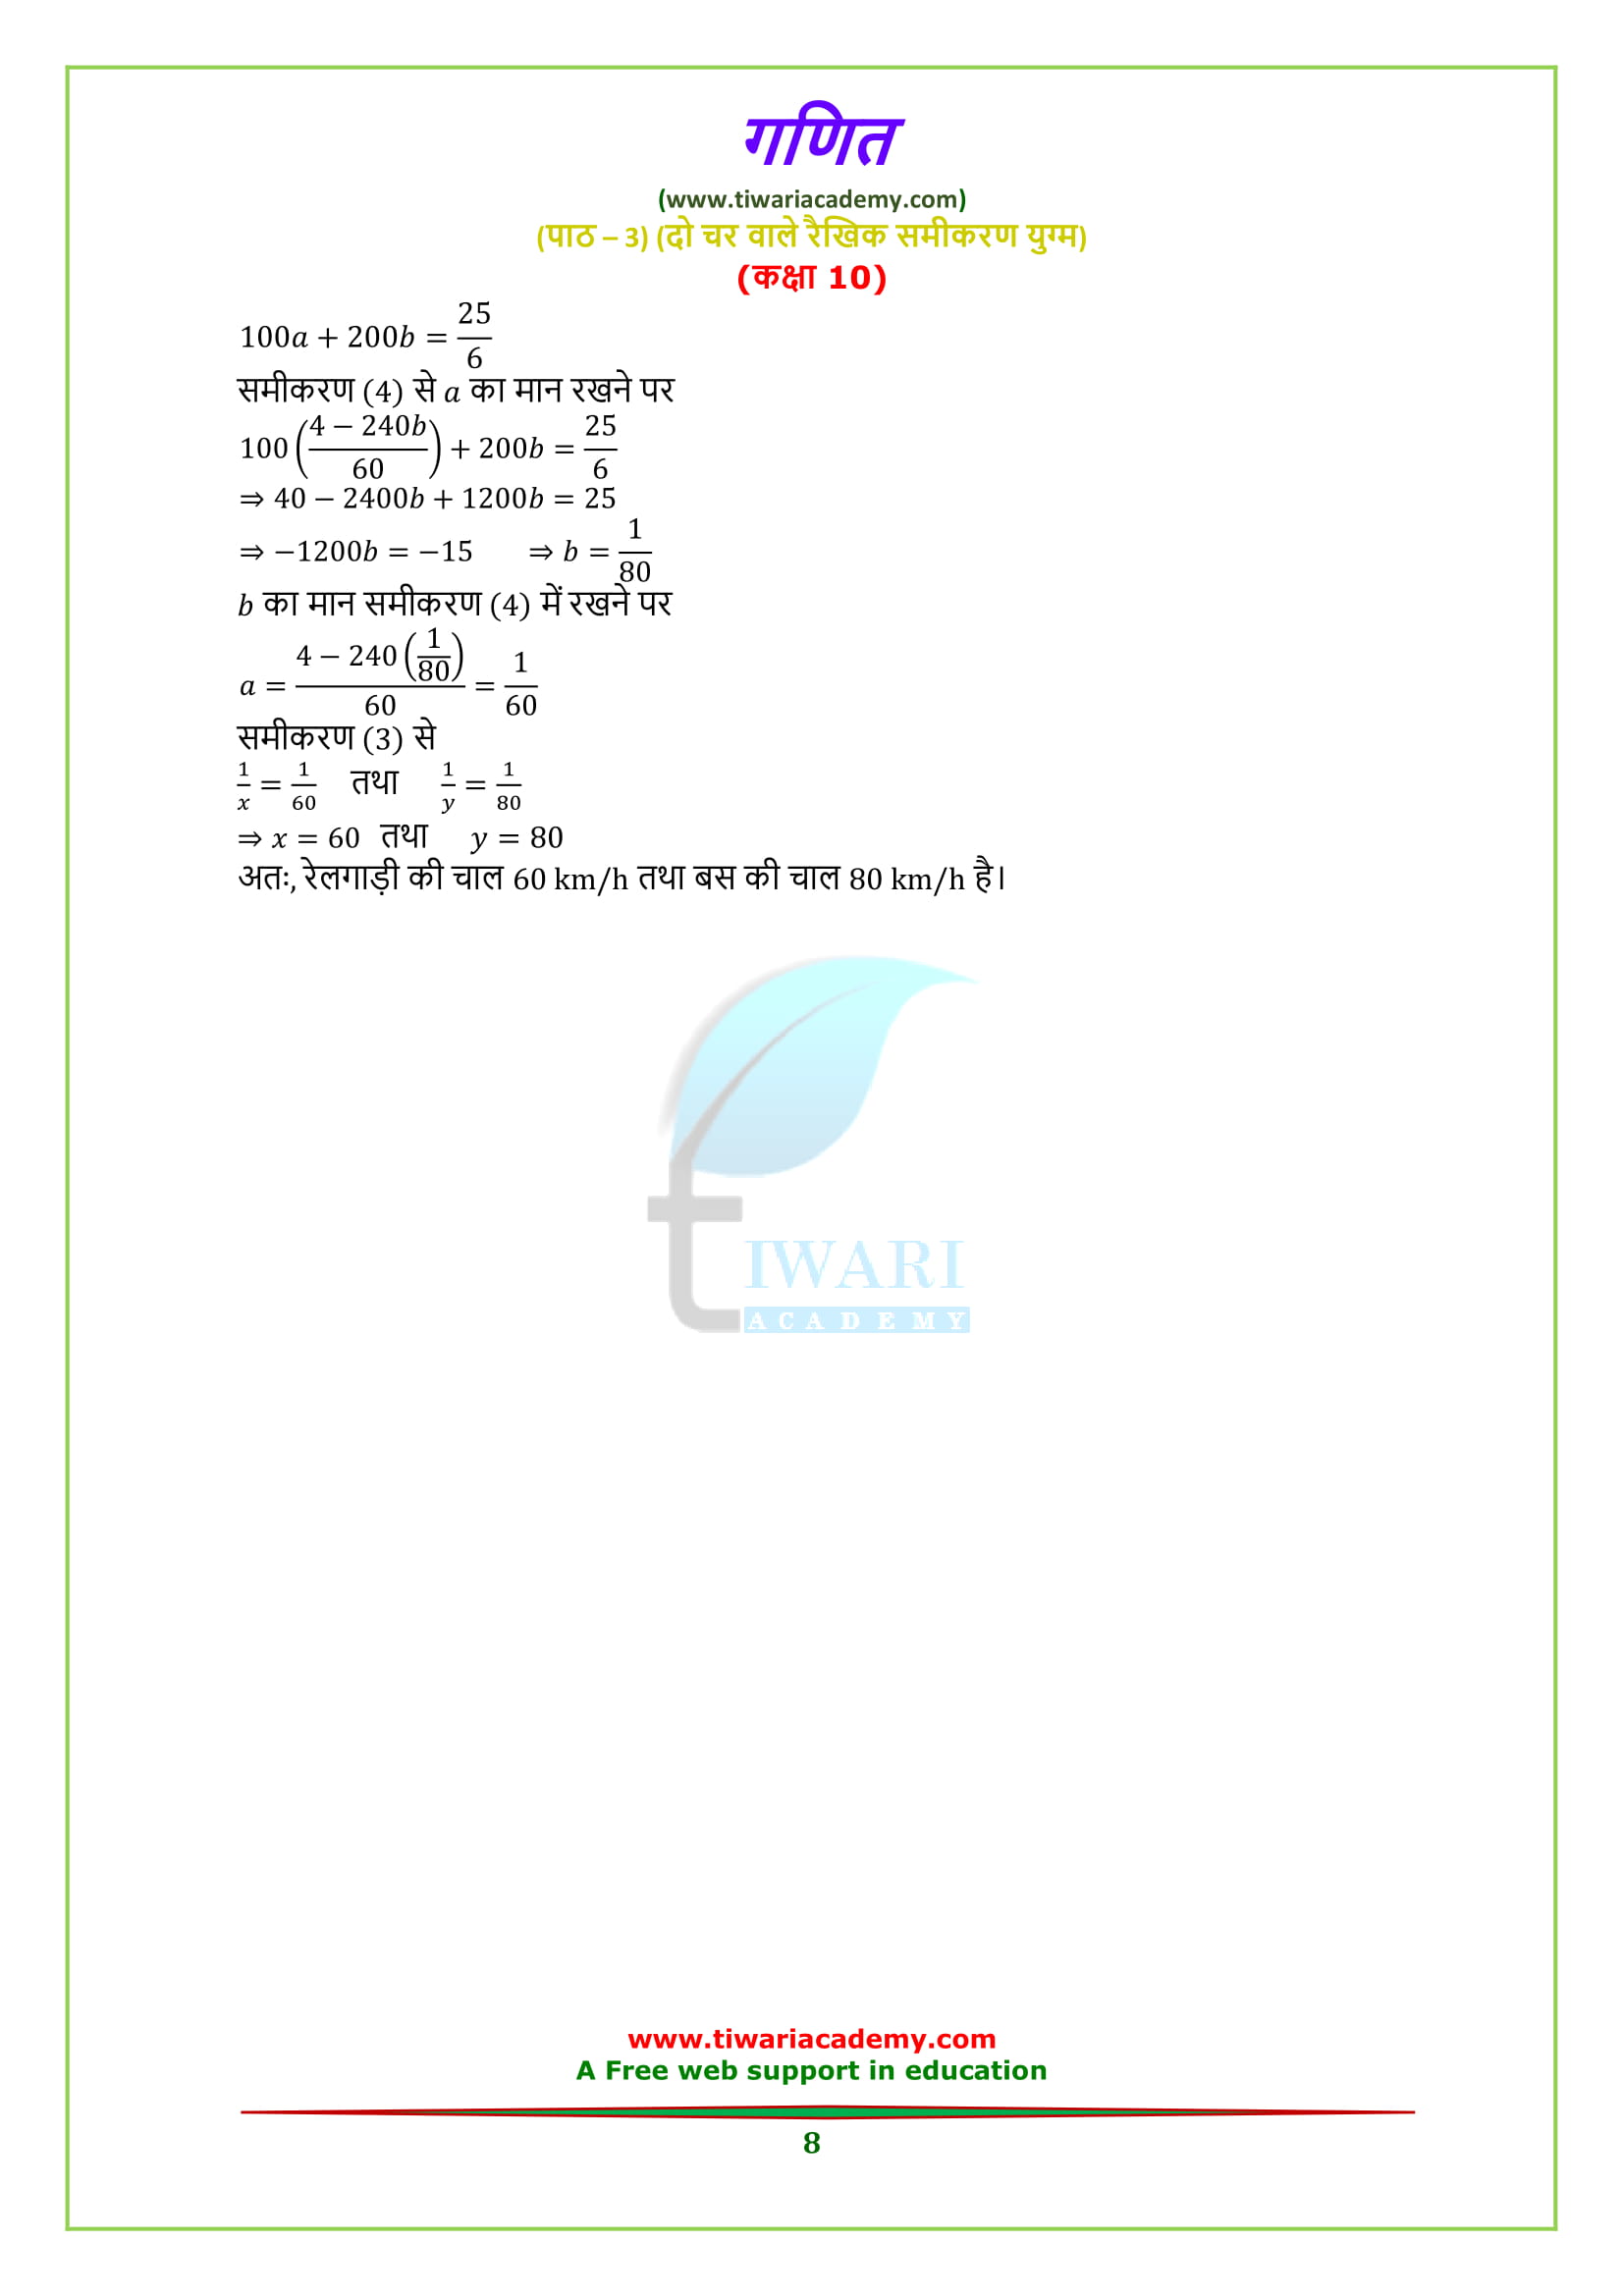 Class 10 maths chapter 3 exercise 3.6 solutions in Hindi complete solutions